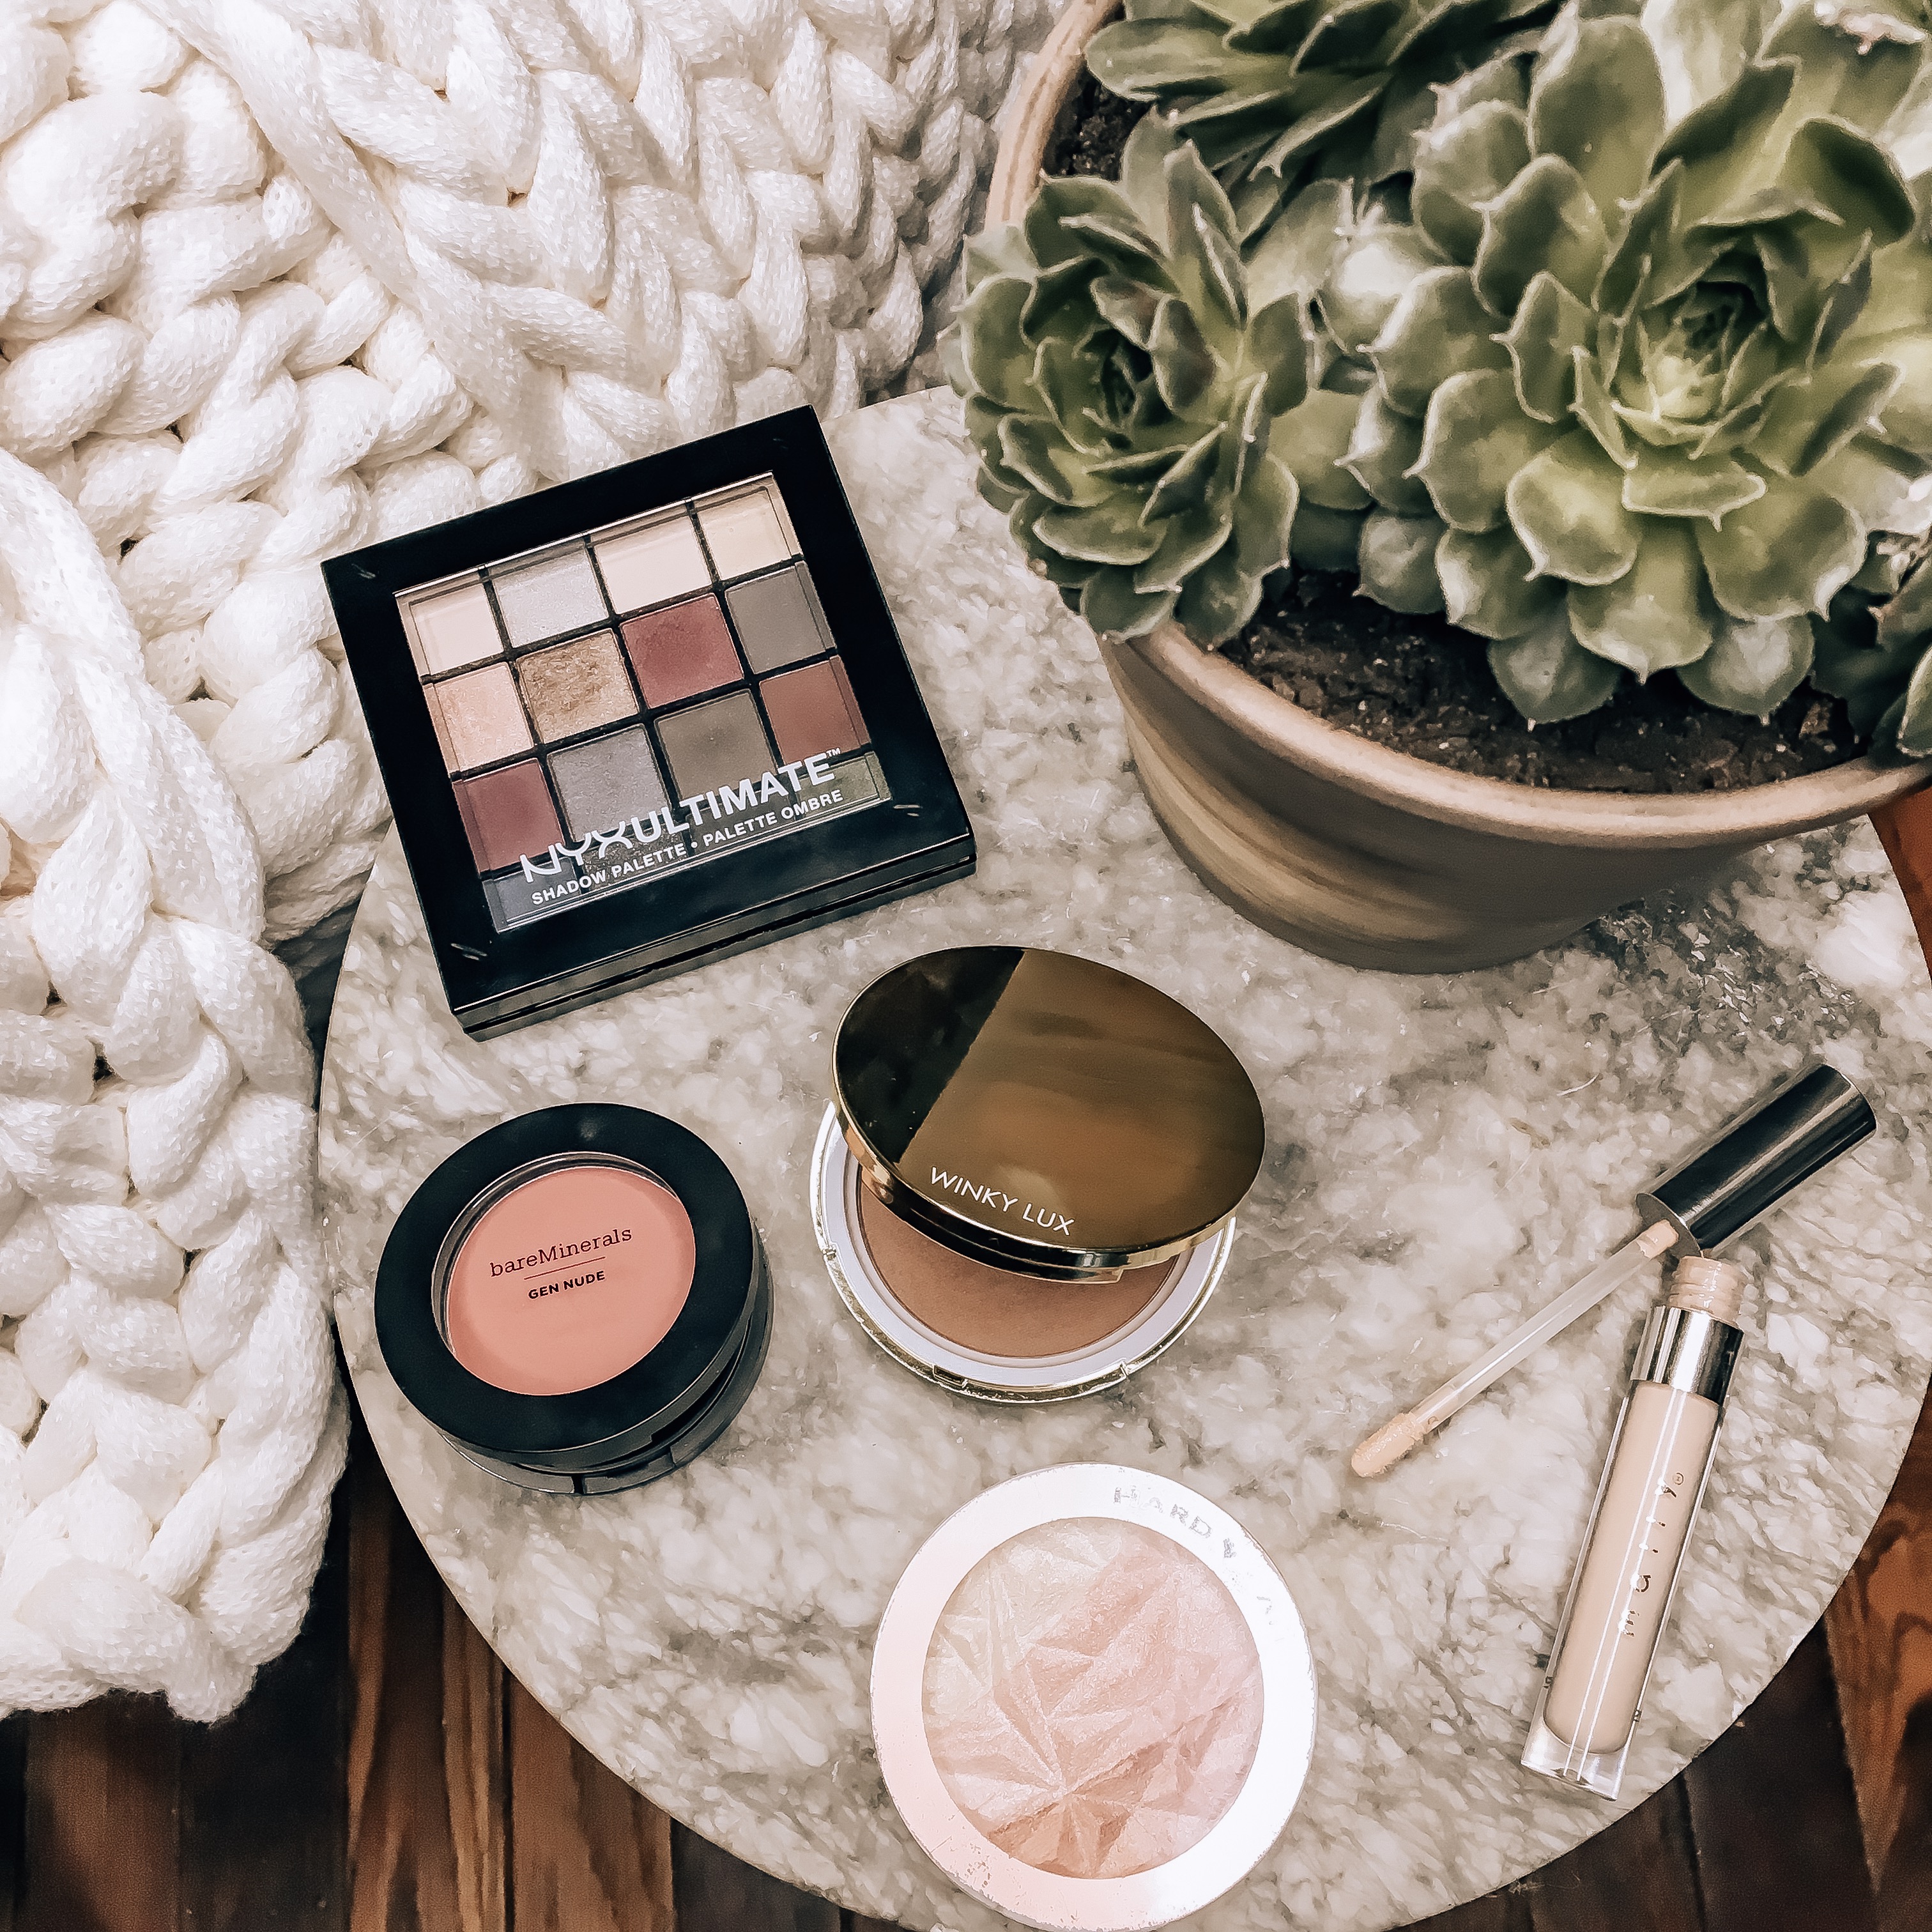 June Top 5 Favorite Beauty Products Roundup!